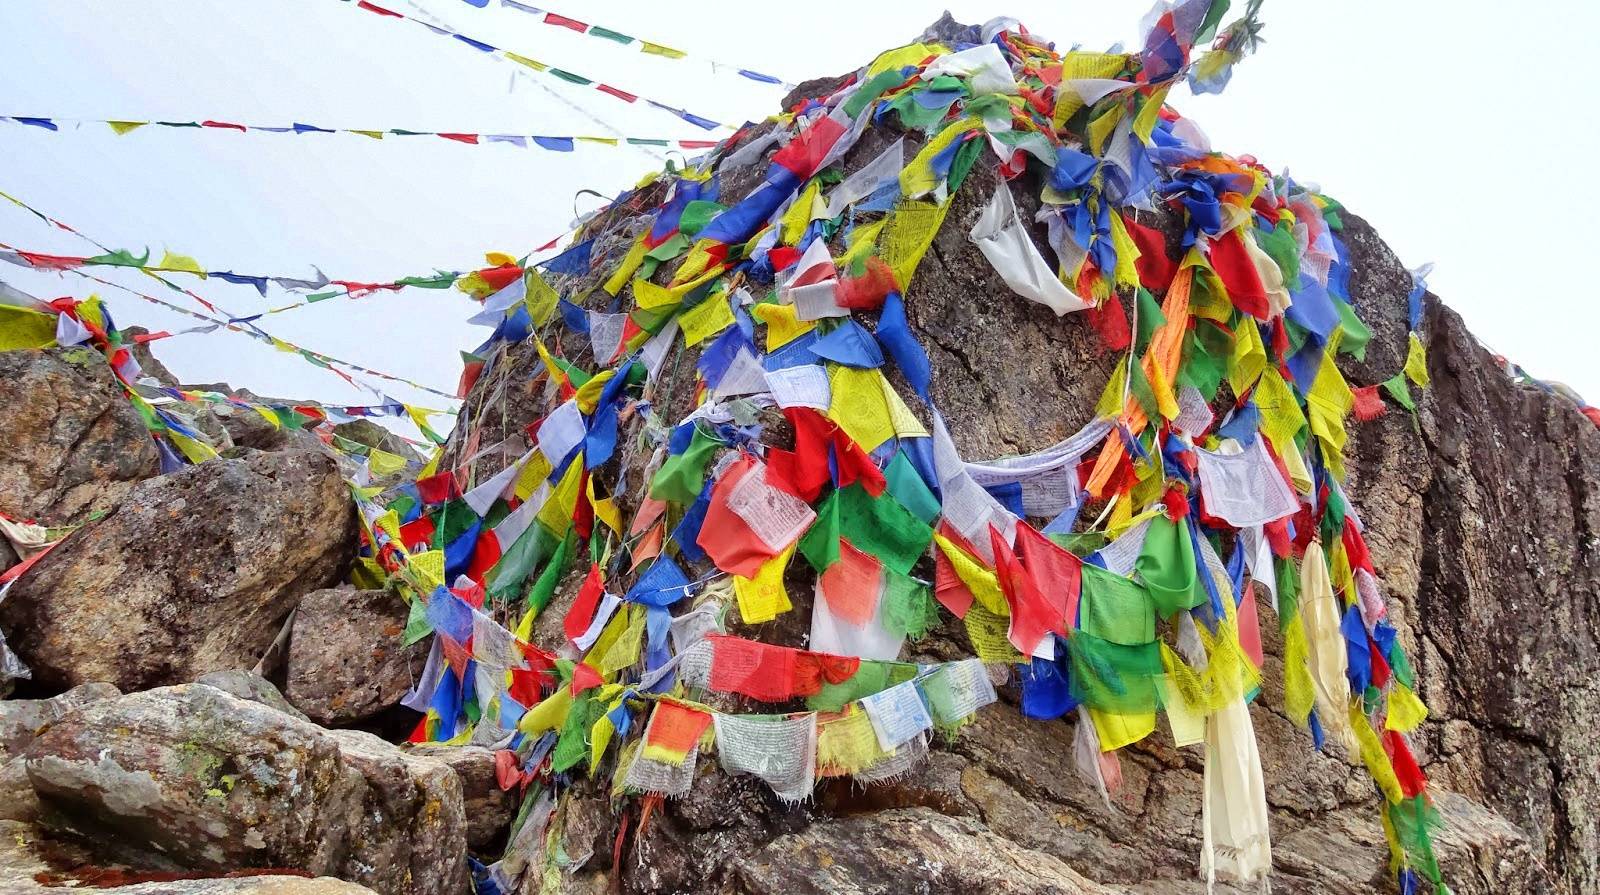 The last prayer flags, but they are legion